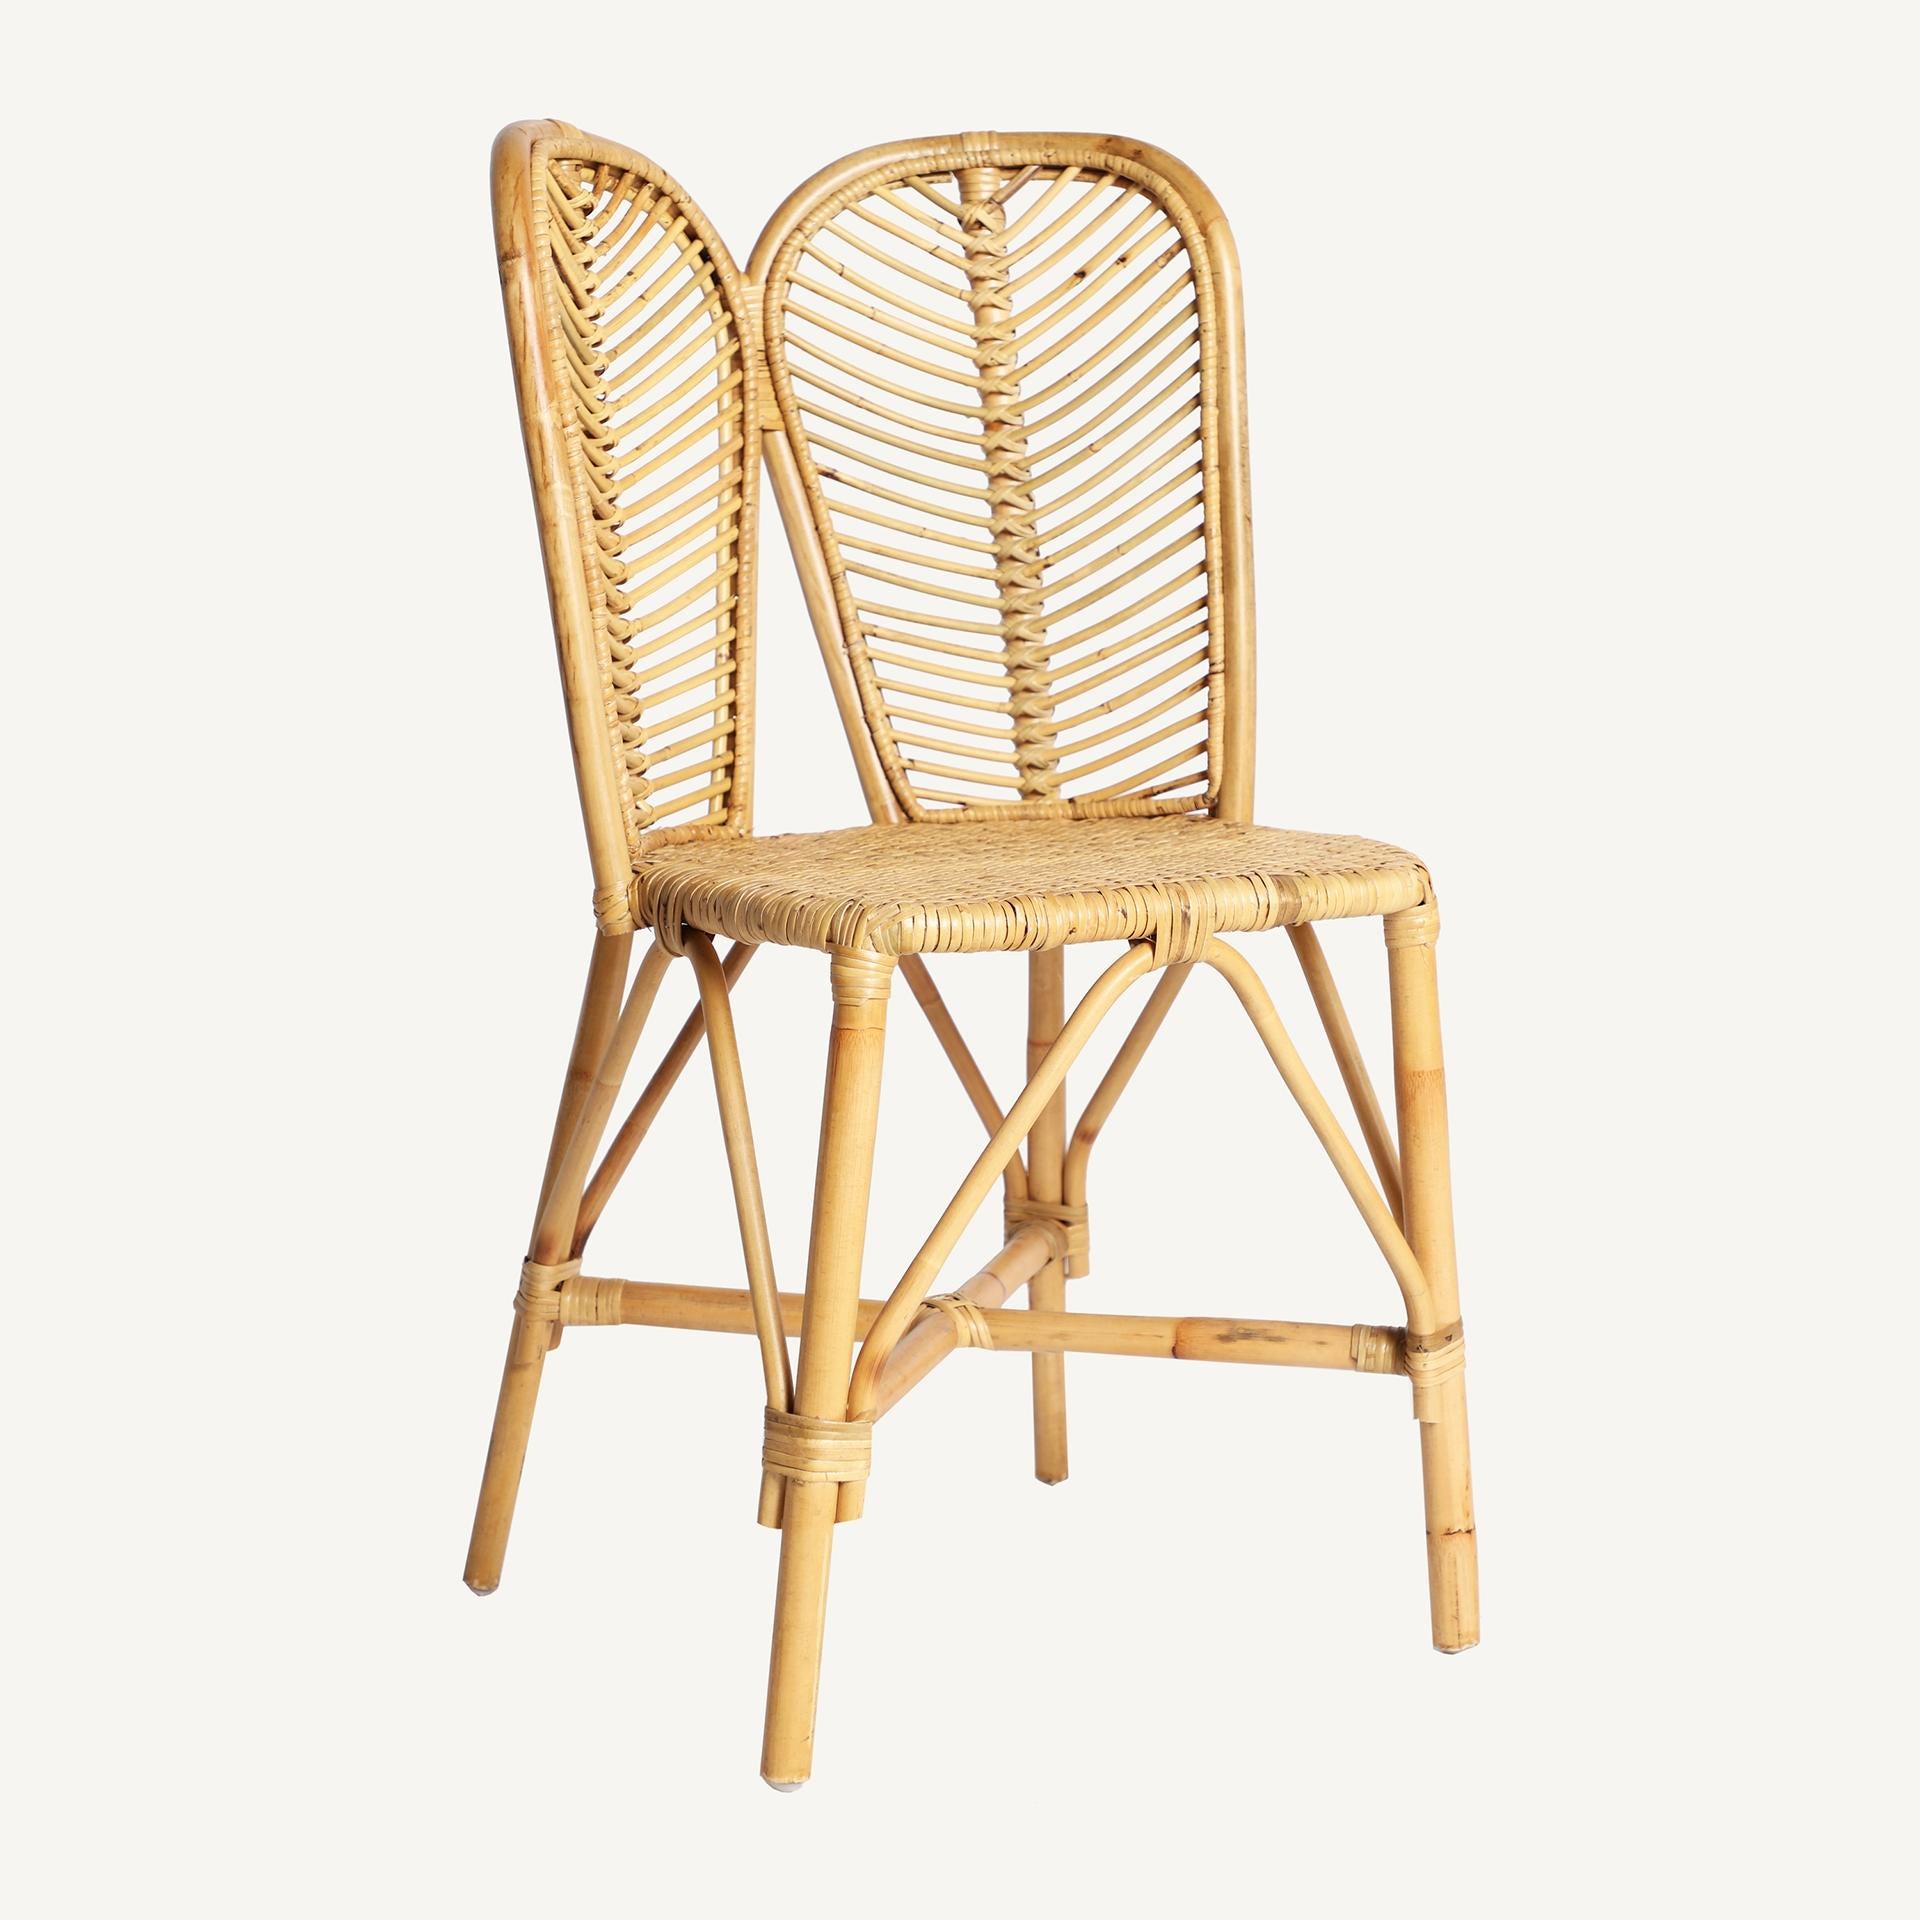 Mid-Century Modern 1960s Italian Design Style Handcrafted Rattan And Wicker Seat Chair For Sale